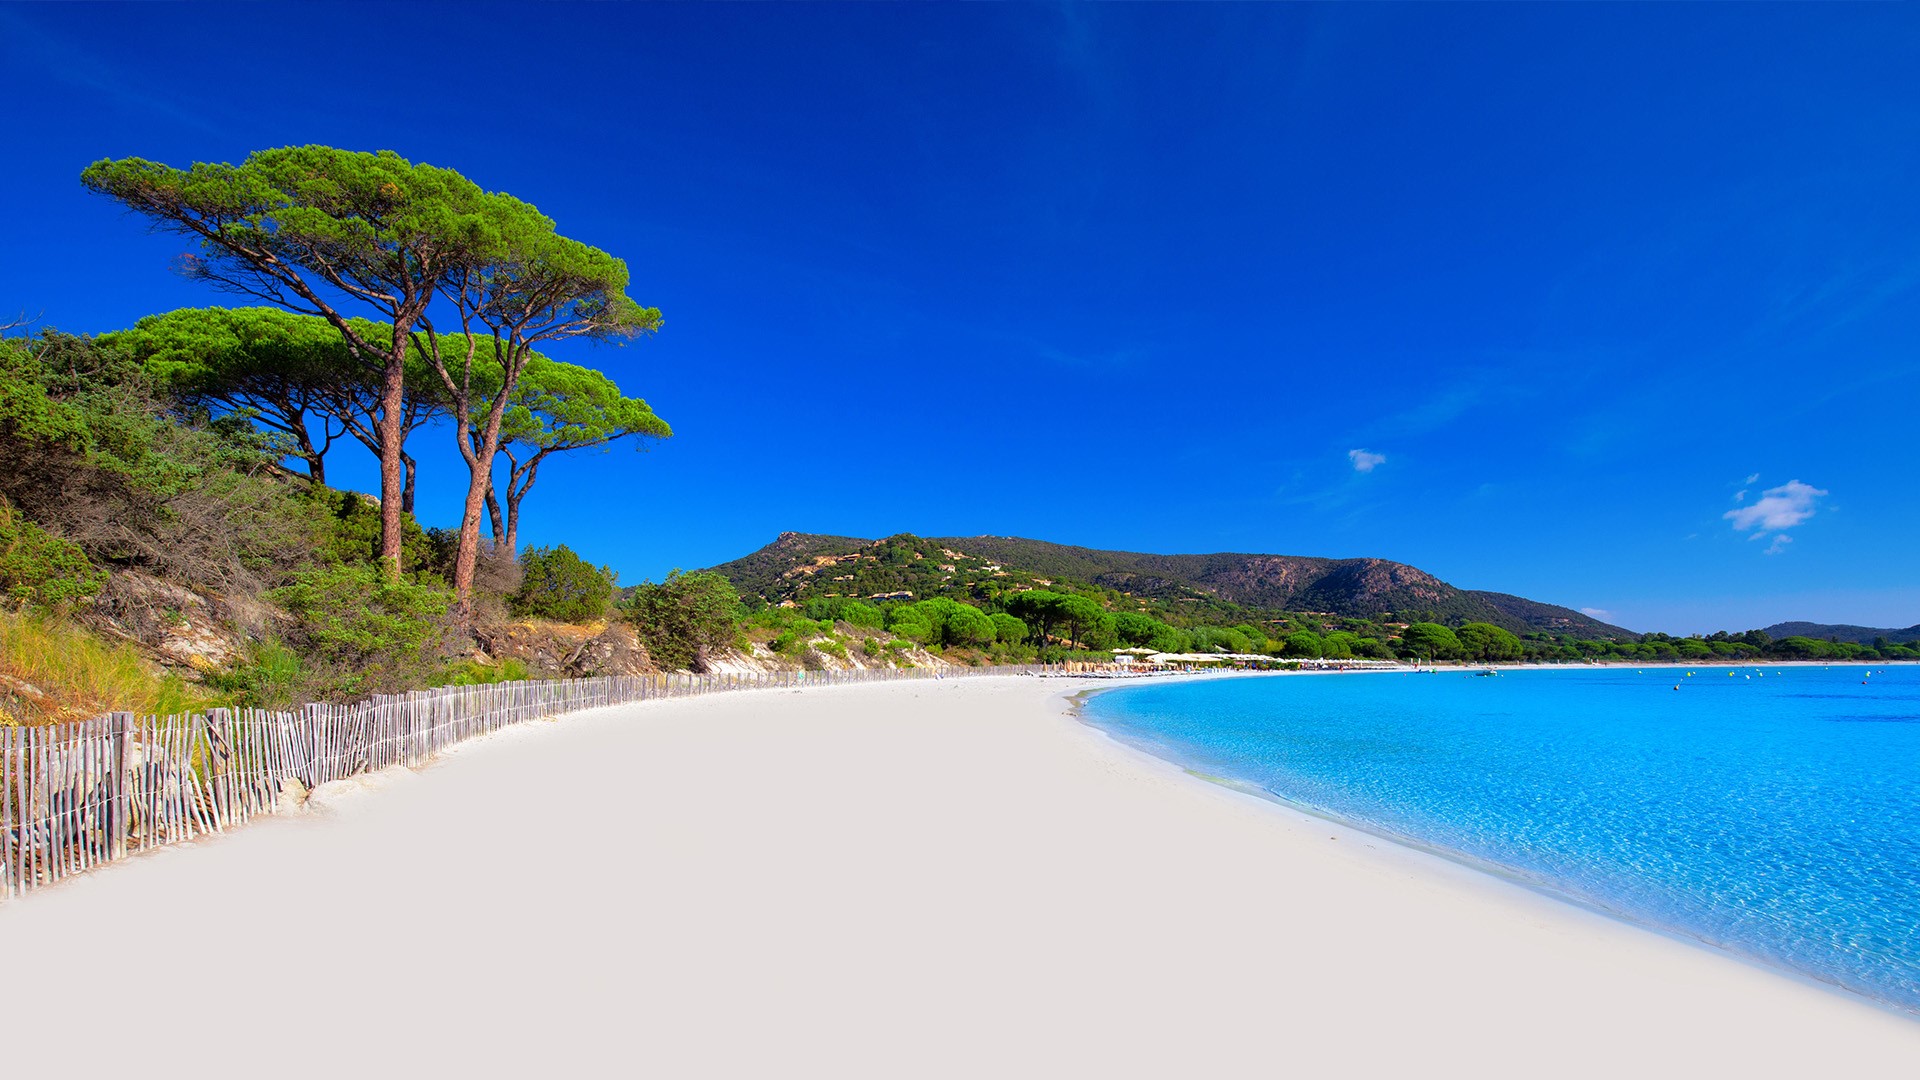 General 1920x1080 nature landscape sand water trees coast clear sky Corsica France beach